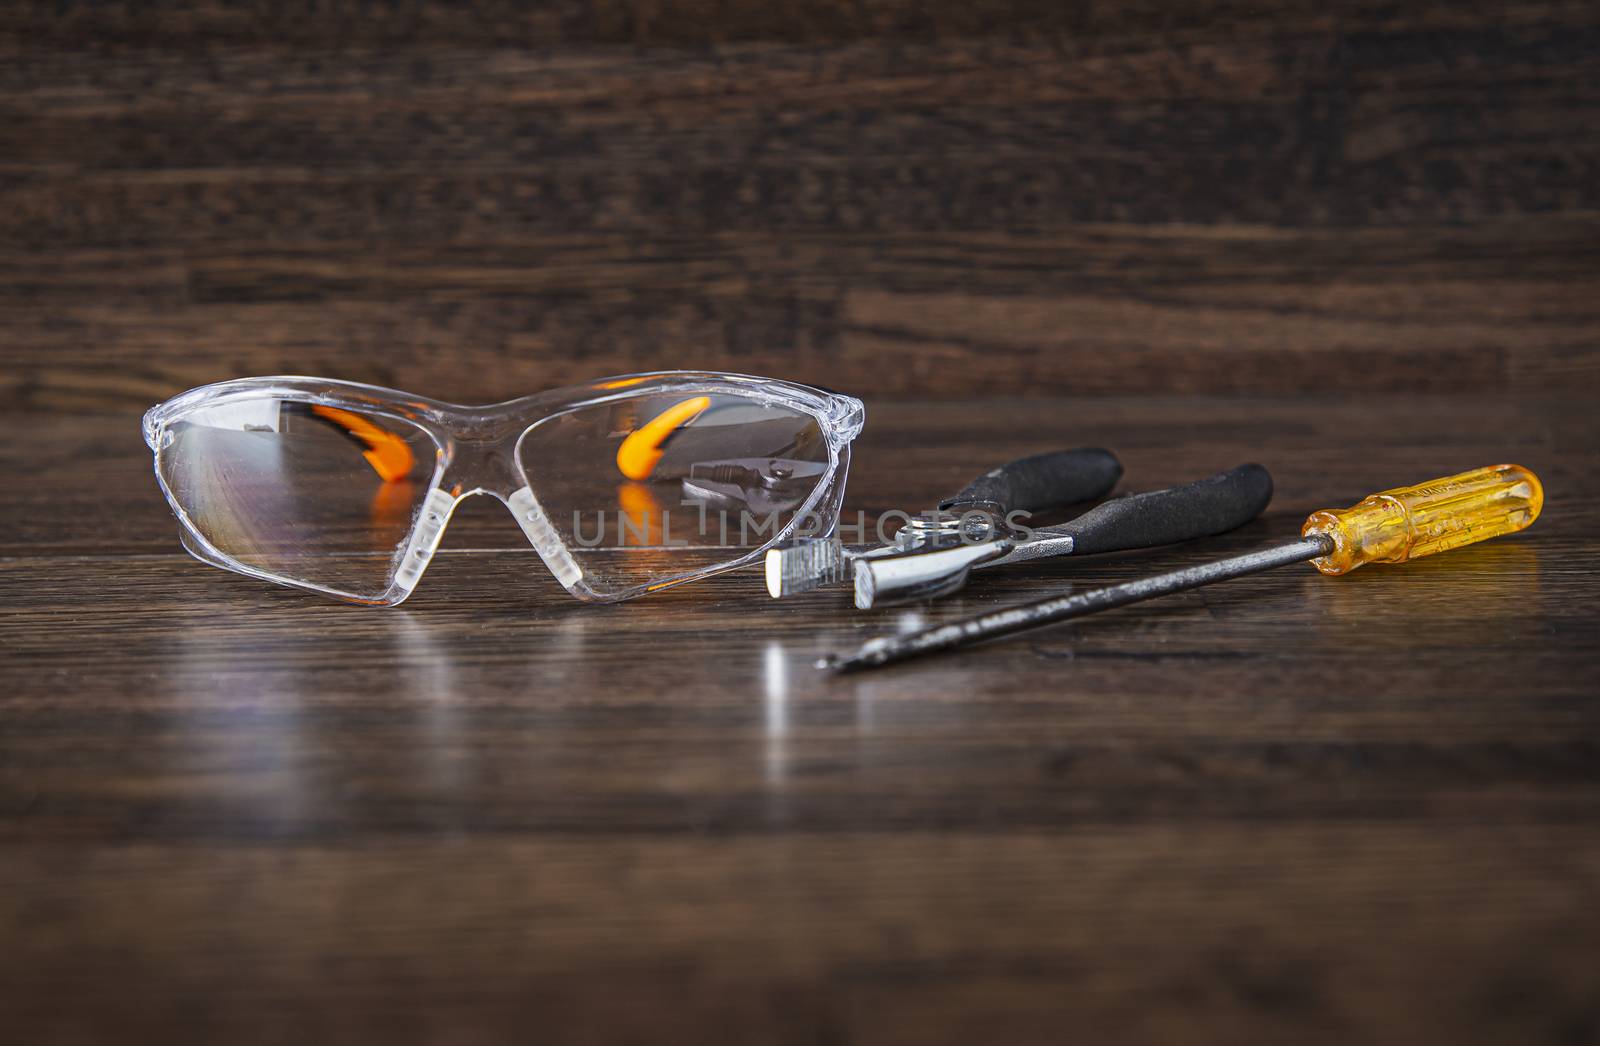 protective glasses, pliers and a screw driver against a dark wood background